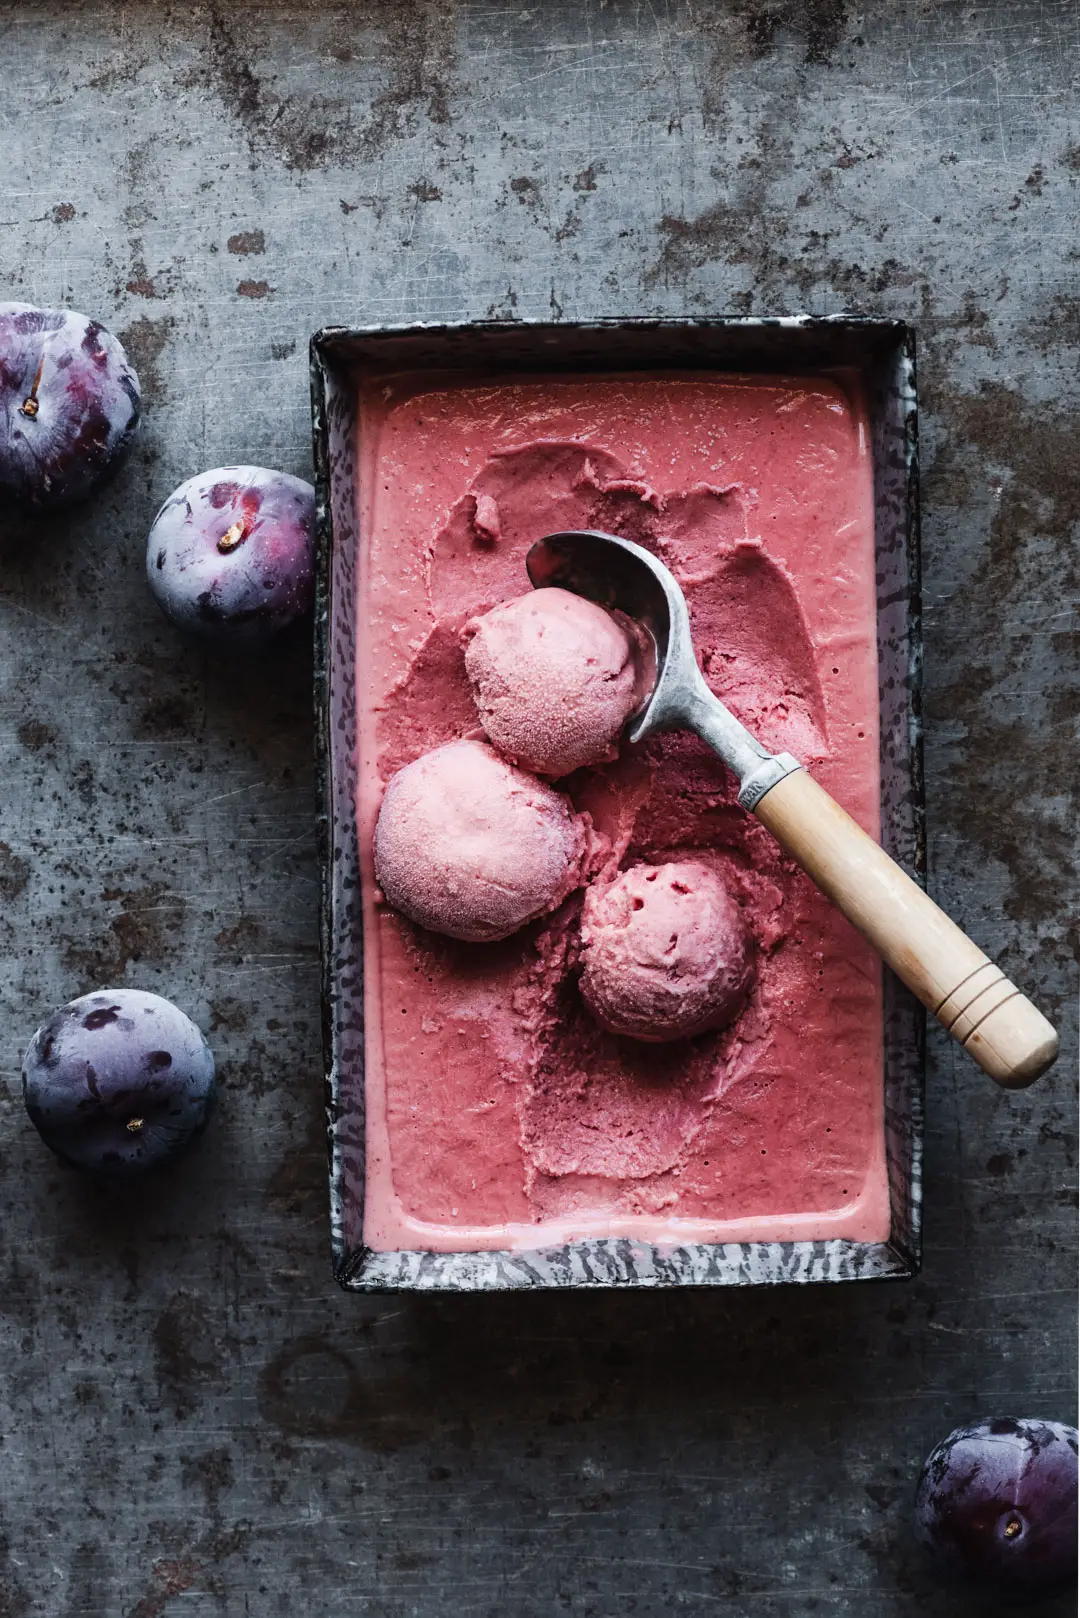 SIMPLE PLUM SHERBET
Not to be mistaken with sorbet, sherbet is a creamy frozen fruit dessert that you should be sure to enjoy this summer! This simple plum version is sweet, slightly tart, perfectly creamy and can be made without an ice cream maker!